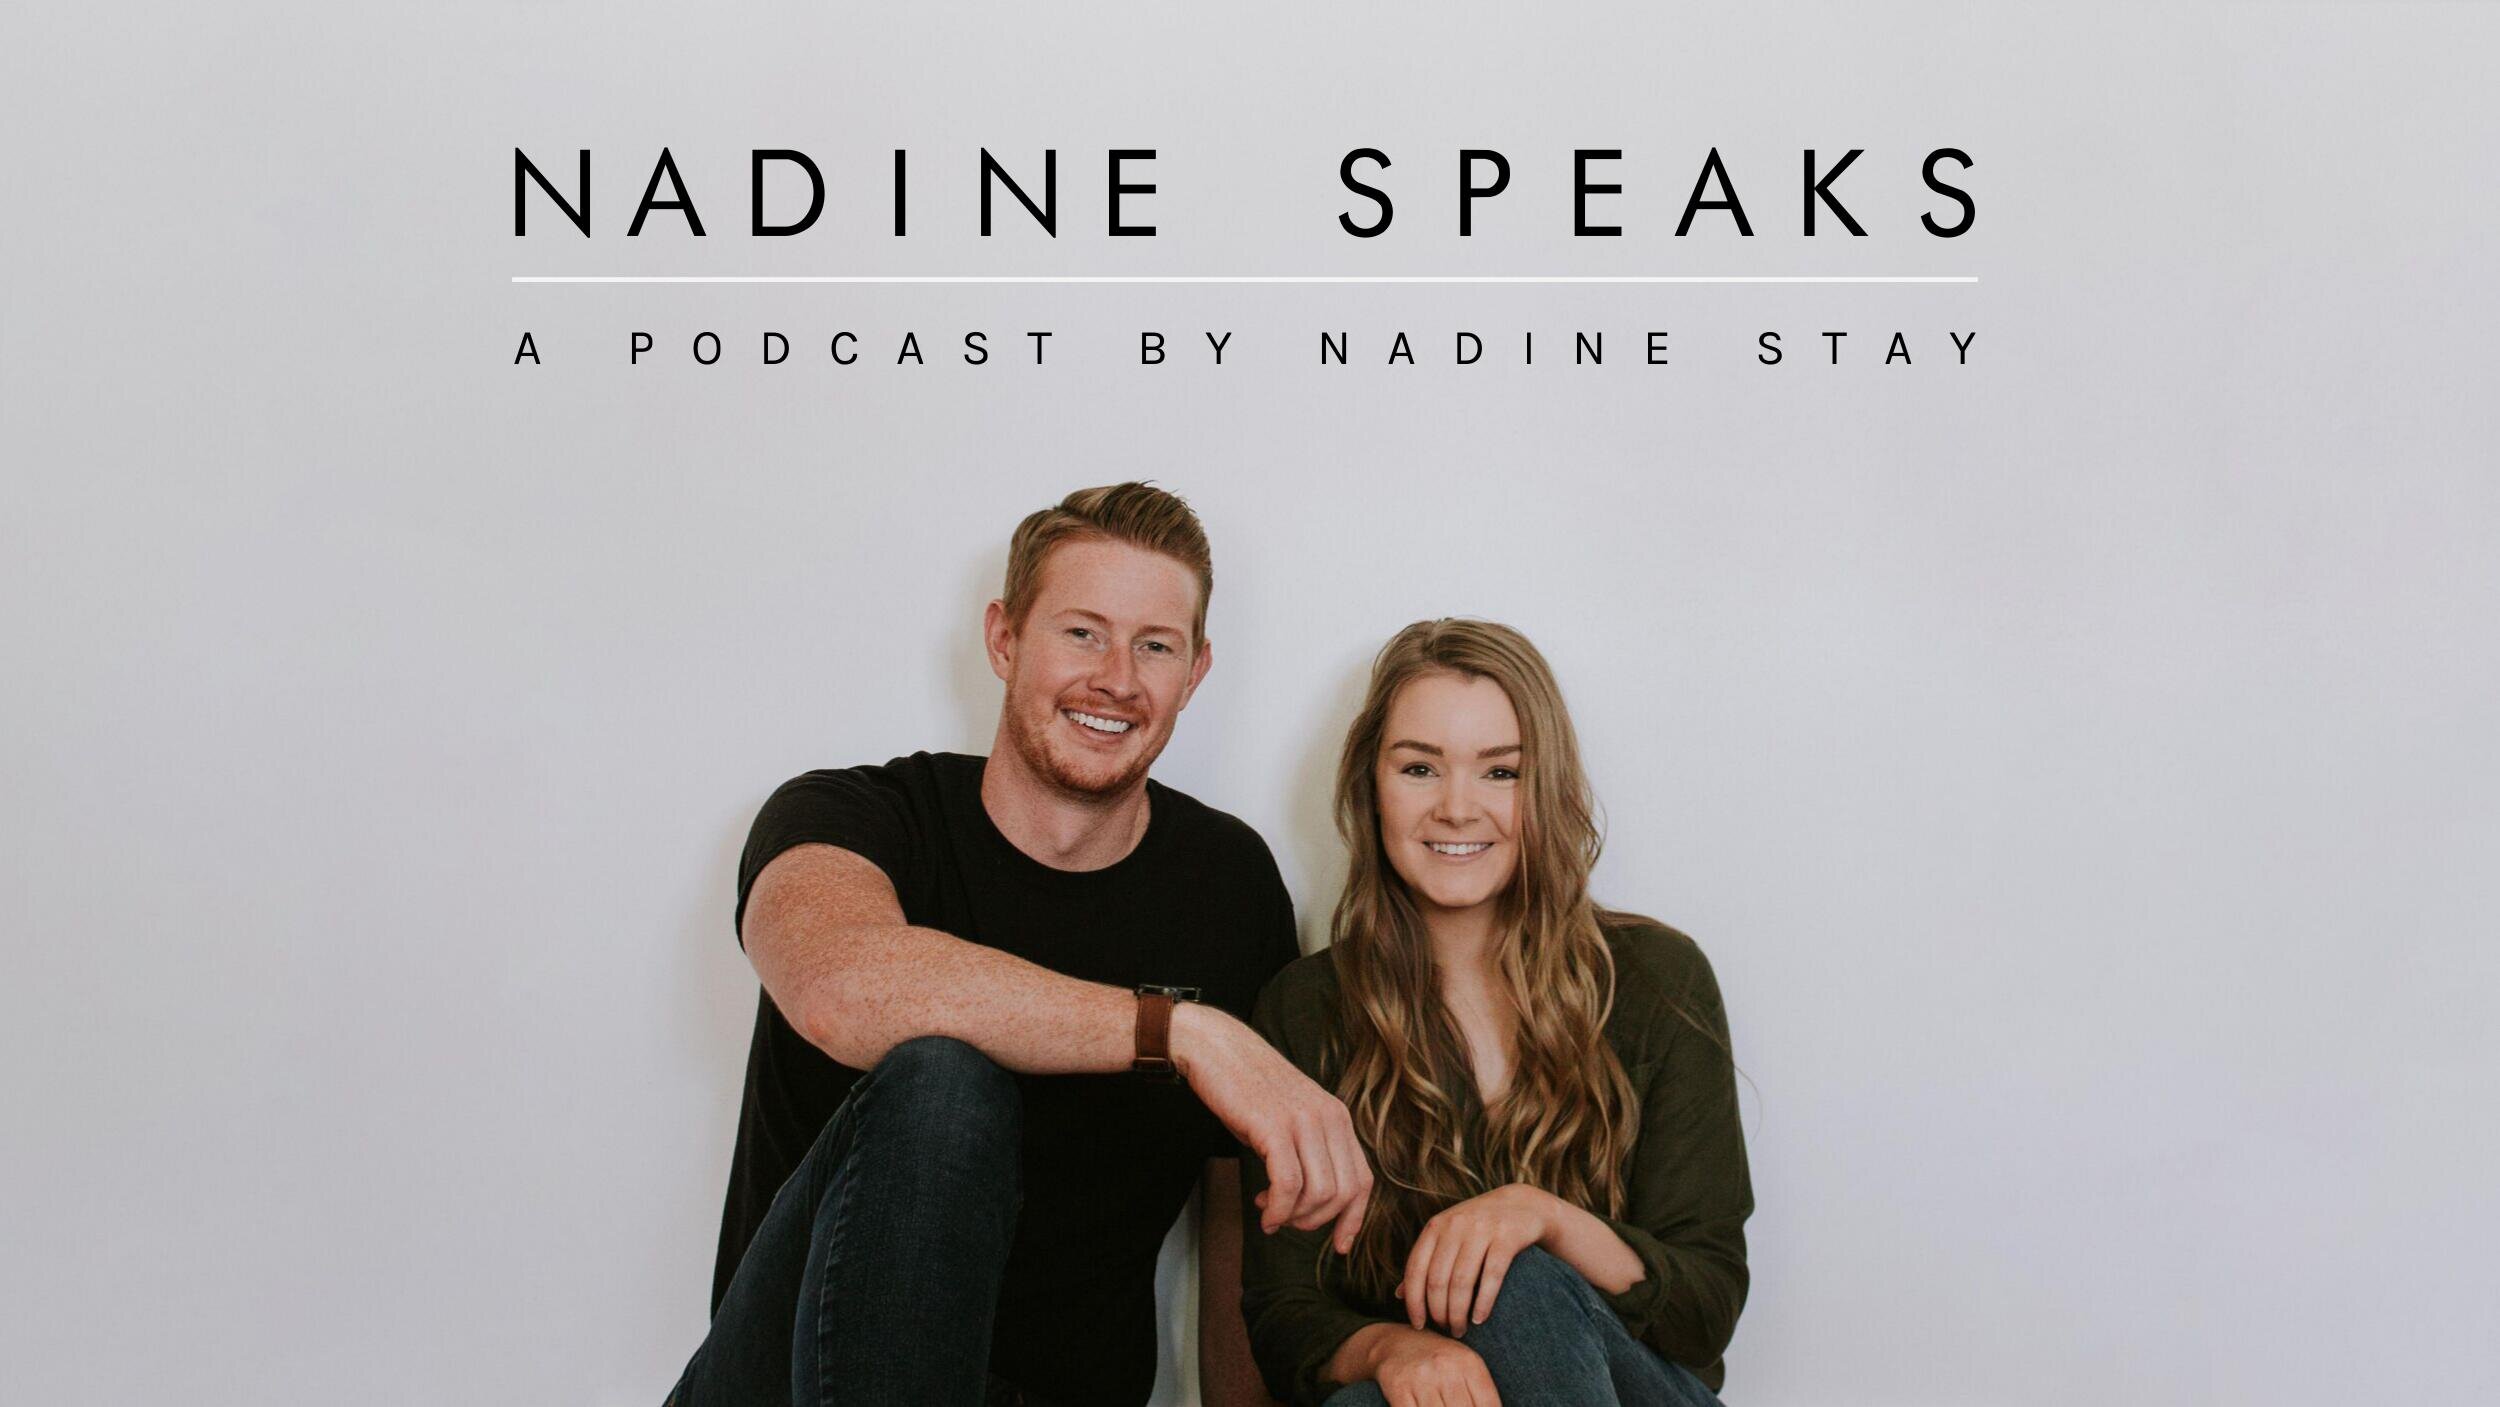 Nadine Speaks - A podcast by Nadine Stay. Hosted by Danica and Chris. Interior Design tips, home renovation advice, and relatable life stories.